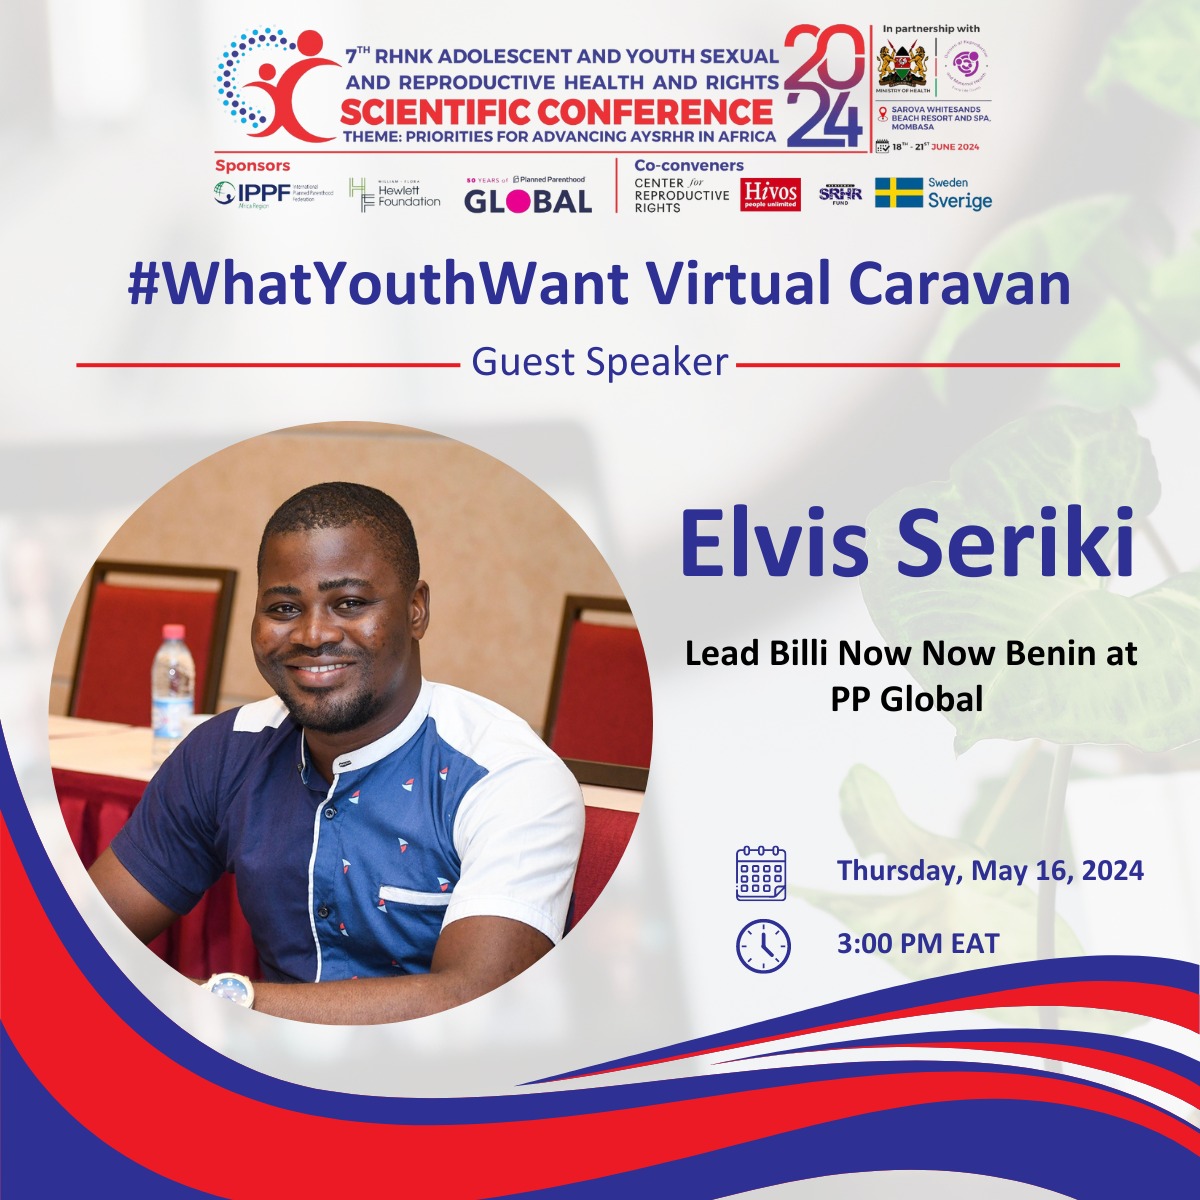 Speaker 2!Join our virtual caravan featuring Mr @Elvis_SERIKI from @Billi_NowNow Benin,under @ppglobe.He brings unmatched expertise in SRHR & youth engagement.Gain valuable insights into youth leadership & governance in SRHR.Register⤵️ us02web.zoom.us/meeting/regist… #RHNKConference2024